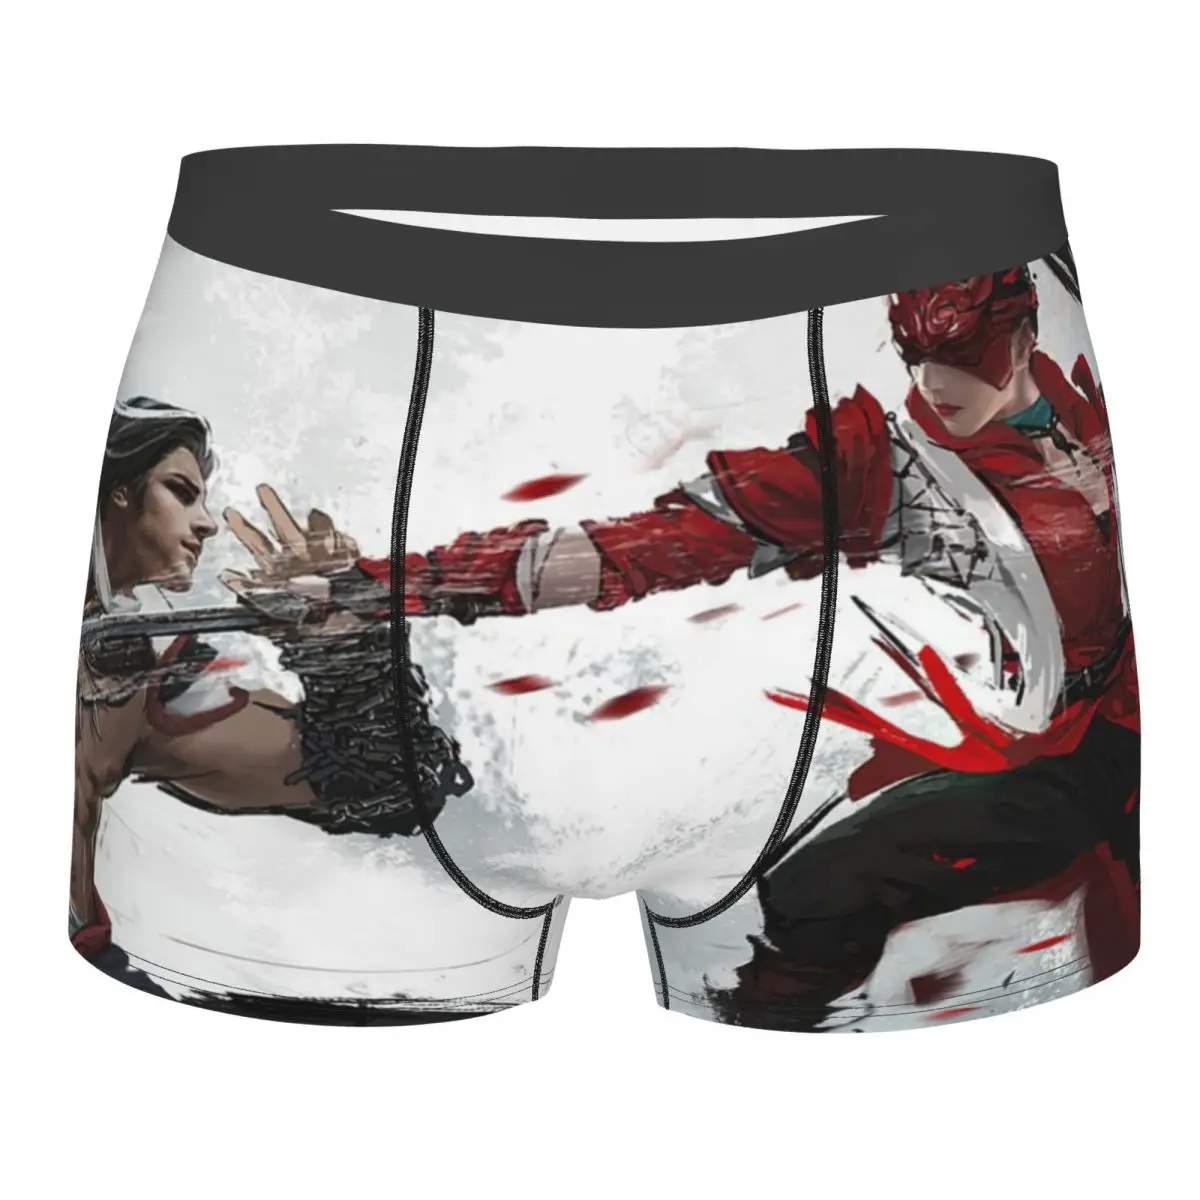 

Confrontation Men Boxer Briefs Naraka Bladepoint Game Breathable Creative Underpants Top Quality Print Shorts Gift Idea